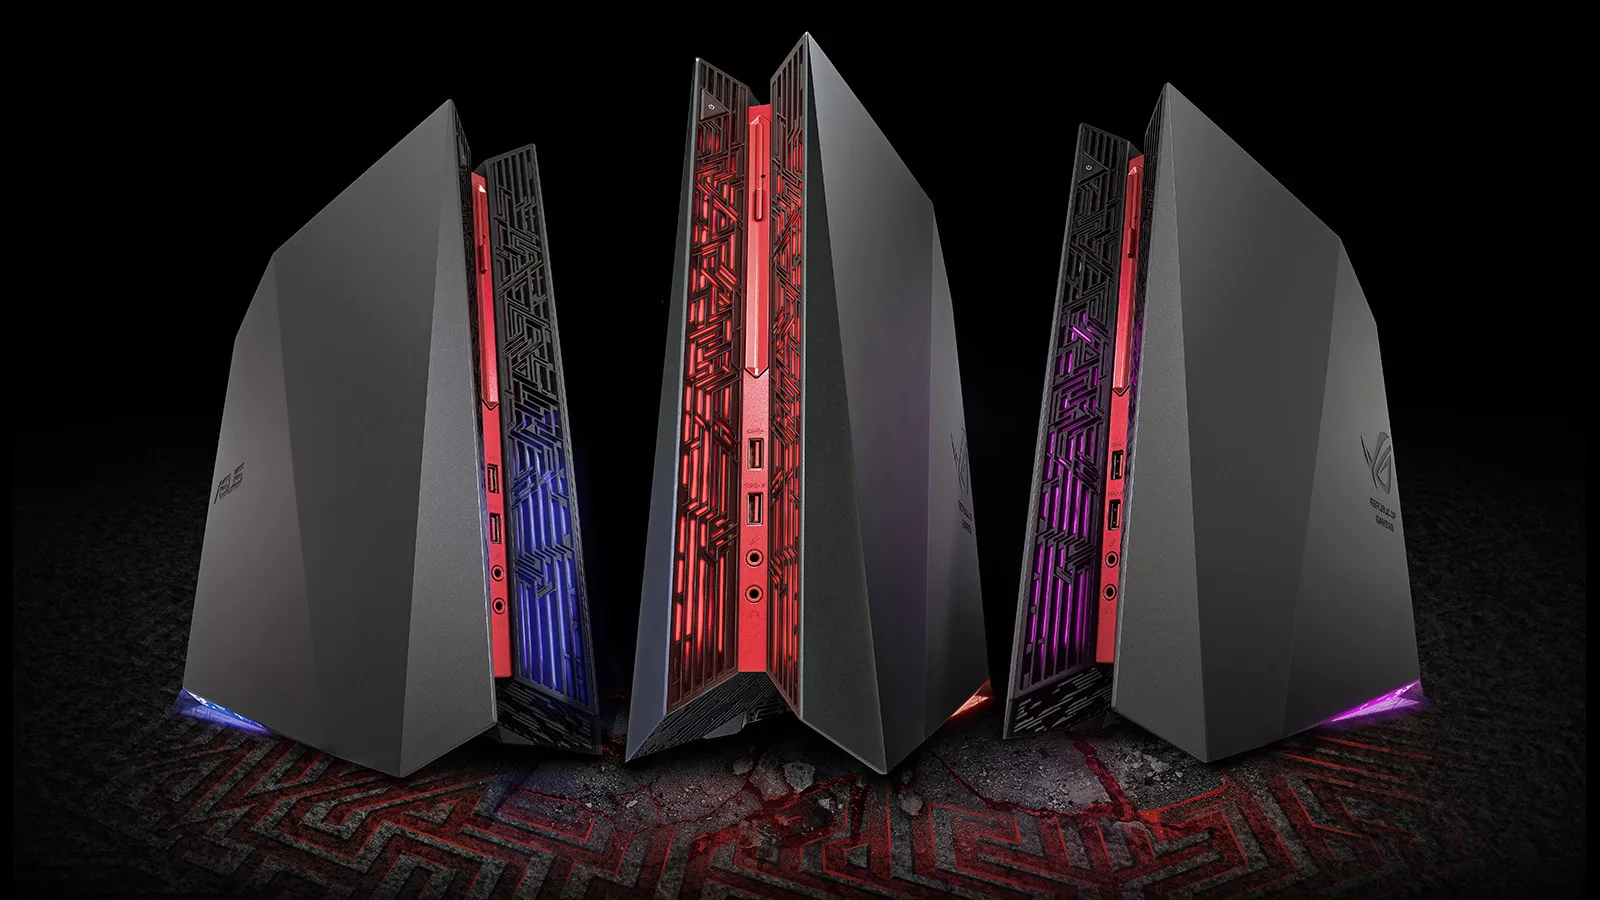 Republic of Gamers Announces with GTX 10-Series Graphics Cards | ROG - Republic of Gamers Global